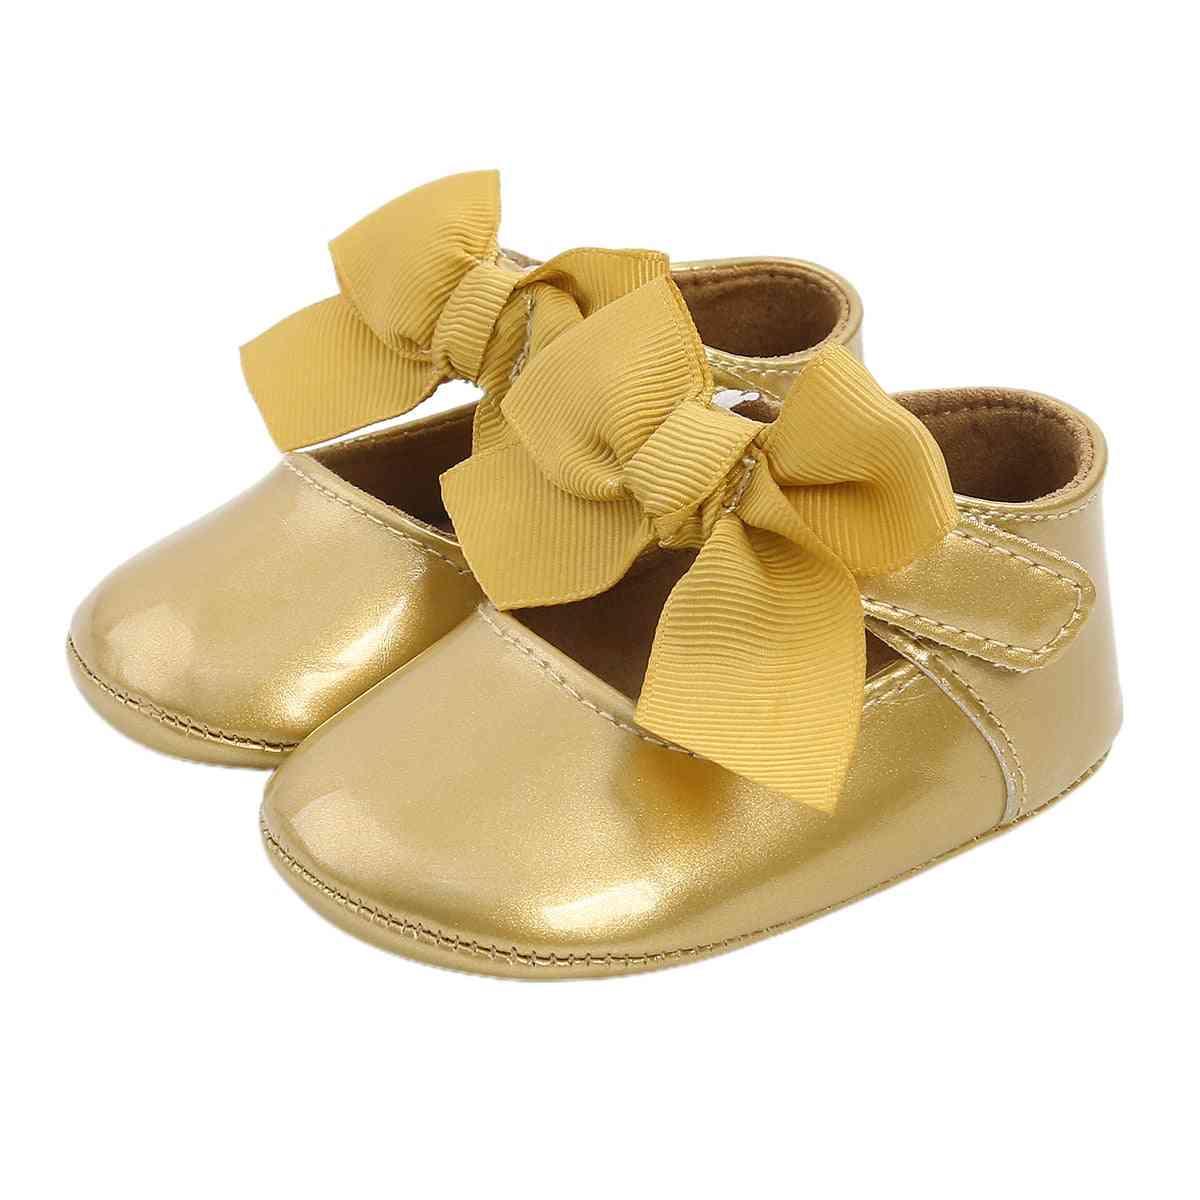 Baby Girl Baptism Shoes, Soft Sole Princess Flats With Cute Ribbon Bow, Non-slip